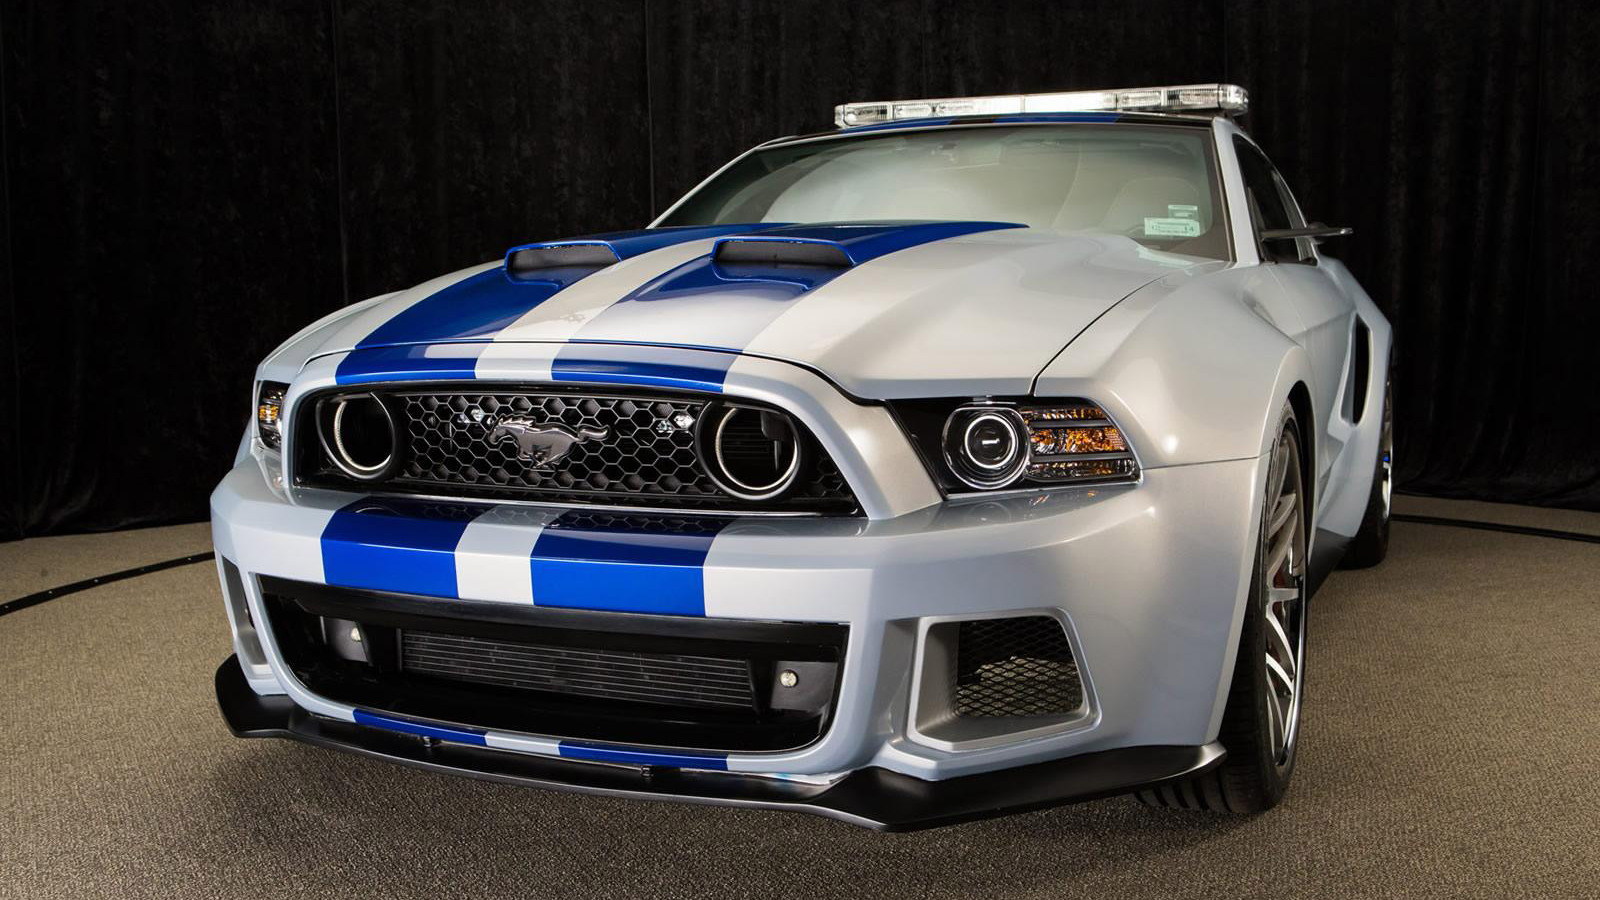 Ford Mustang from ‘Need For Speed’ movie serves as NASCAR pace car